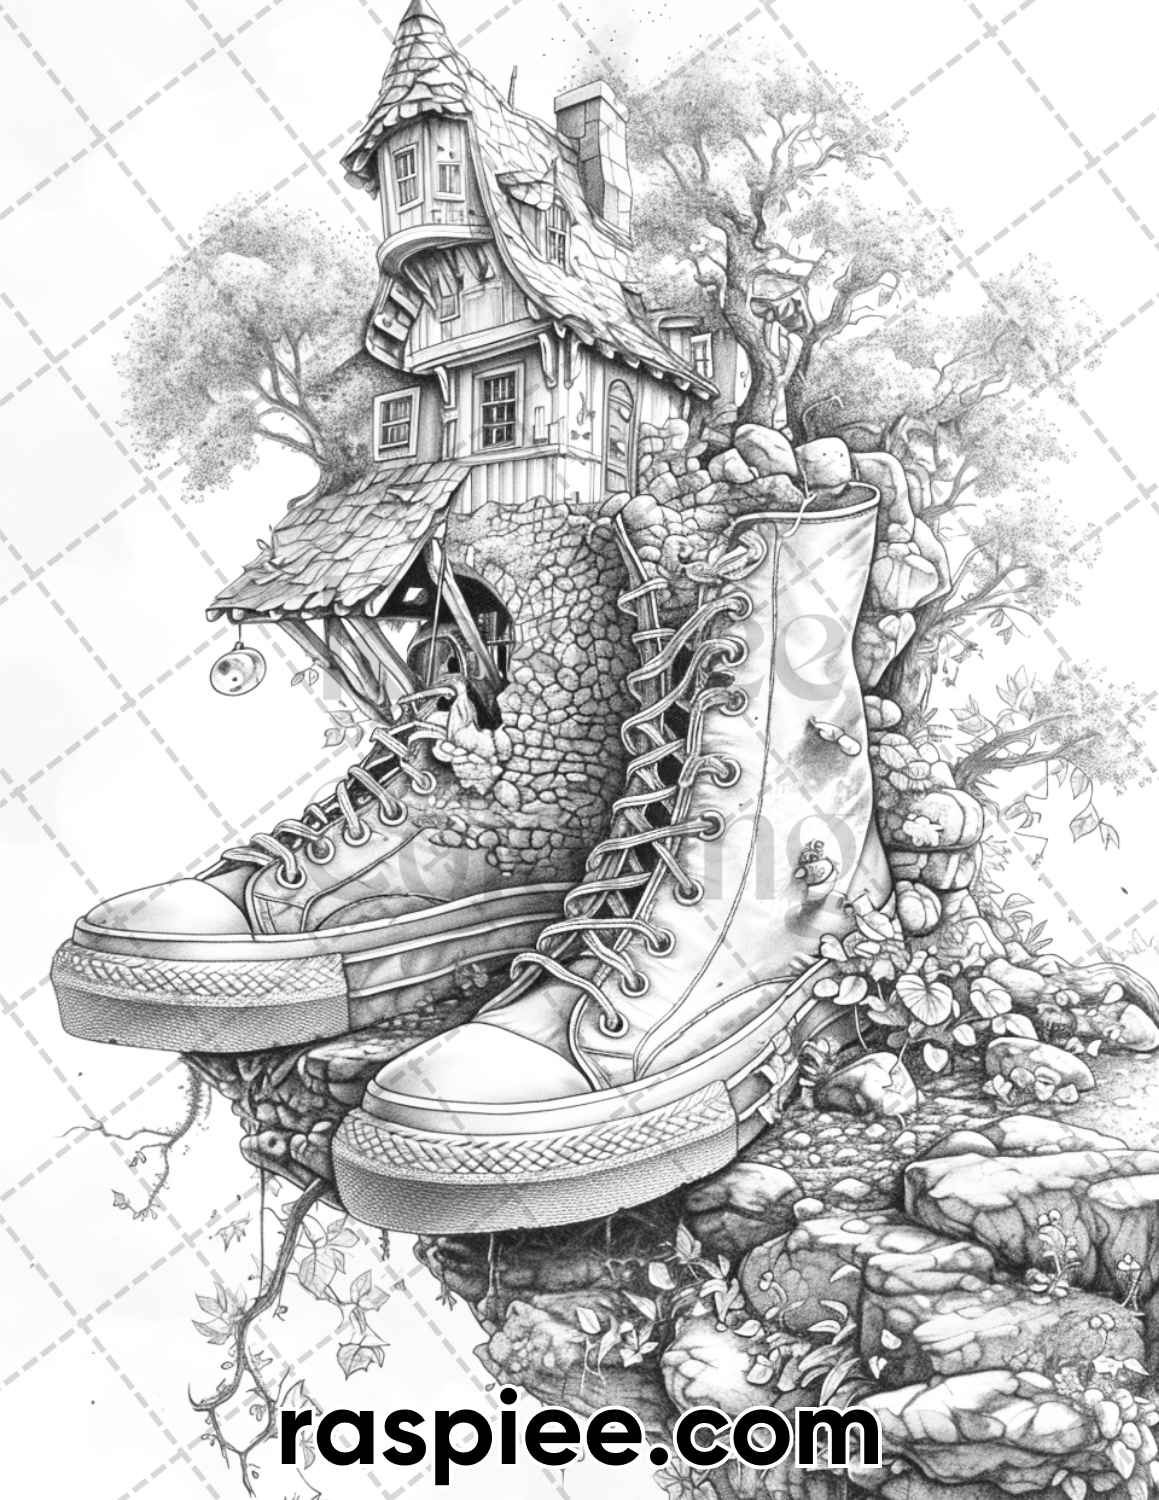 adult coloring pages, adult coloring sheets, adult coloring book pdf, adult coloring book printable, grayscale coloring pages, grayscale coloring books, fantasy coloring pages for adults, fantasy coloring book, grayscale illustration, fantasy shoe house coloring pages